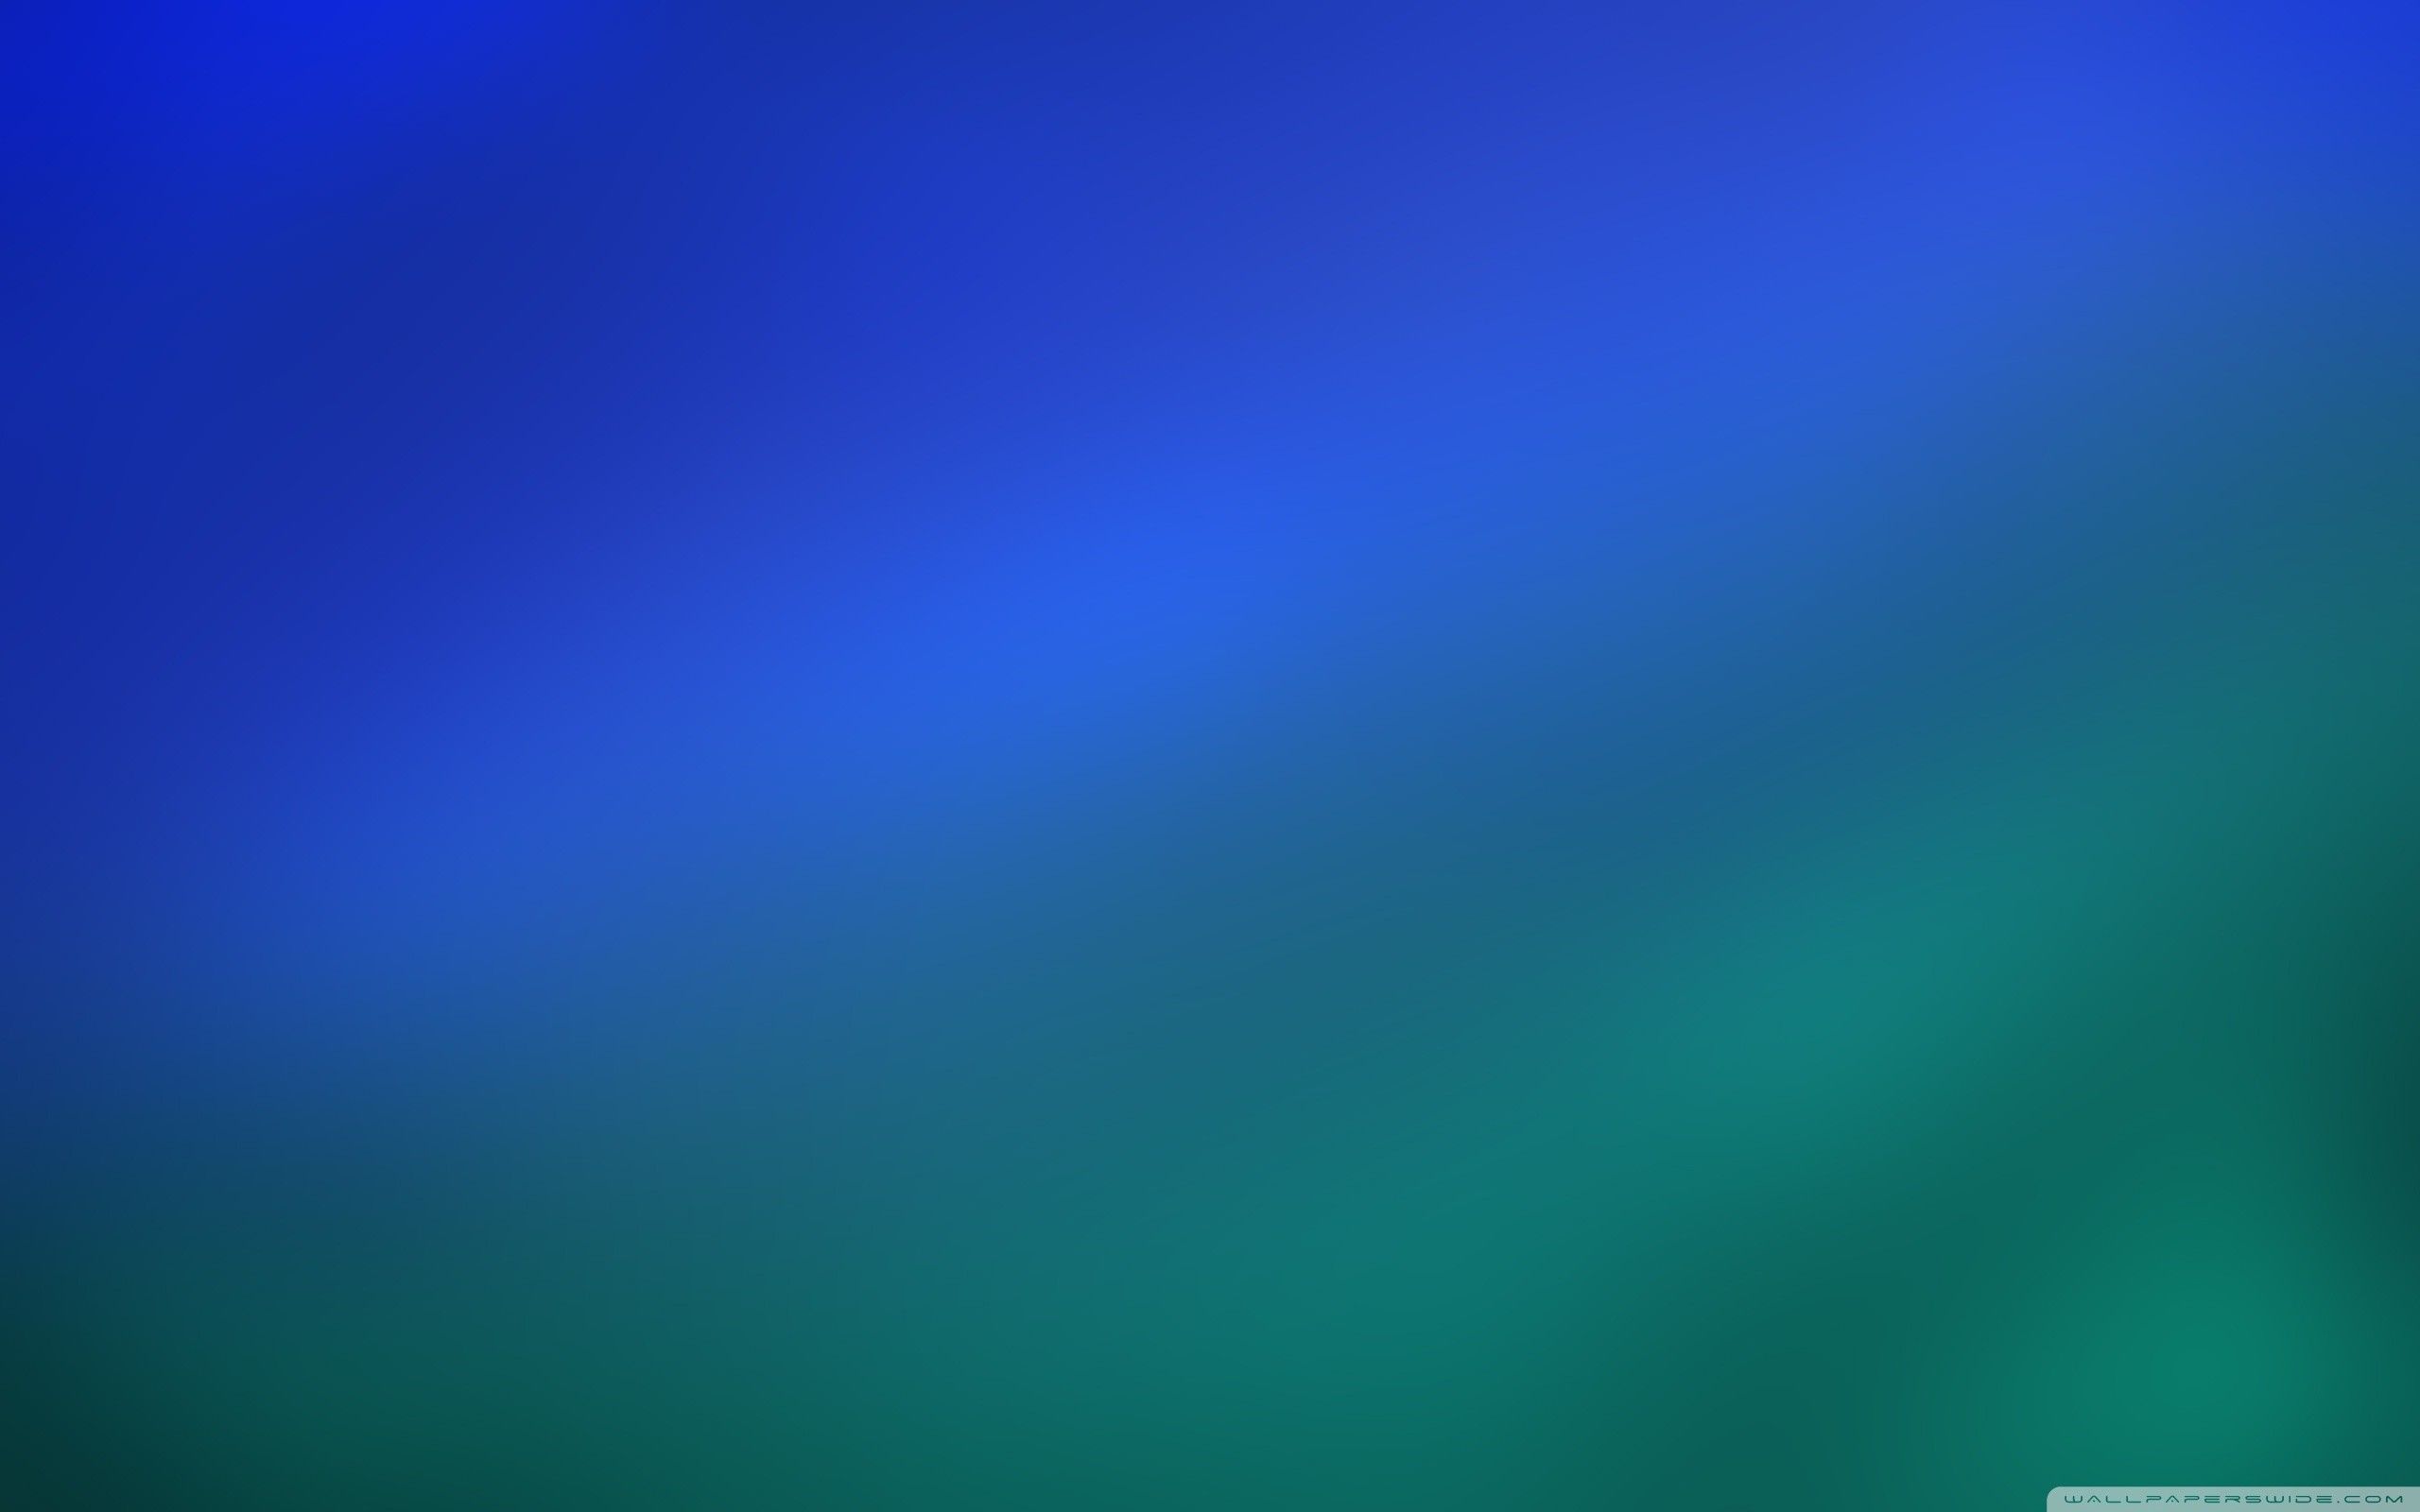 Blue and Green 4K Wallpaper Free Blue and Green 4K Background